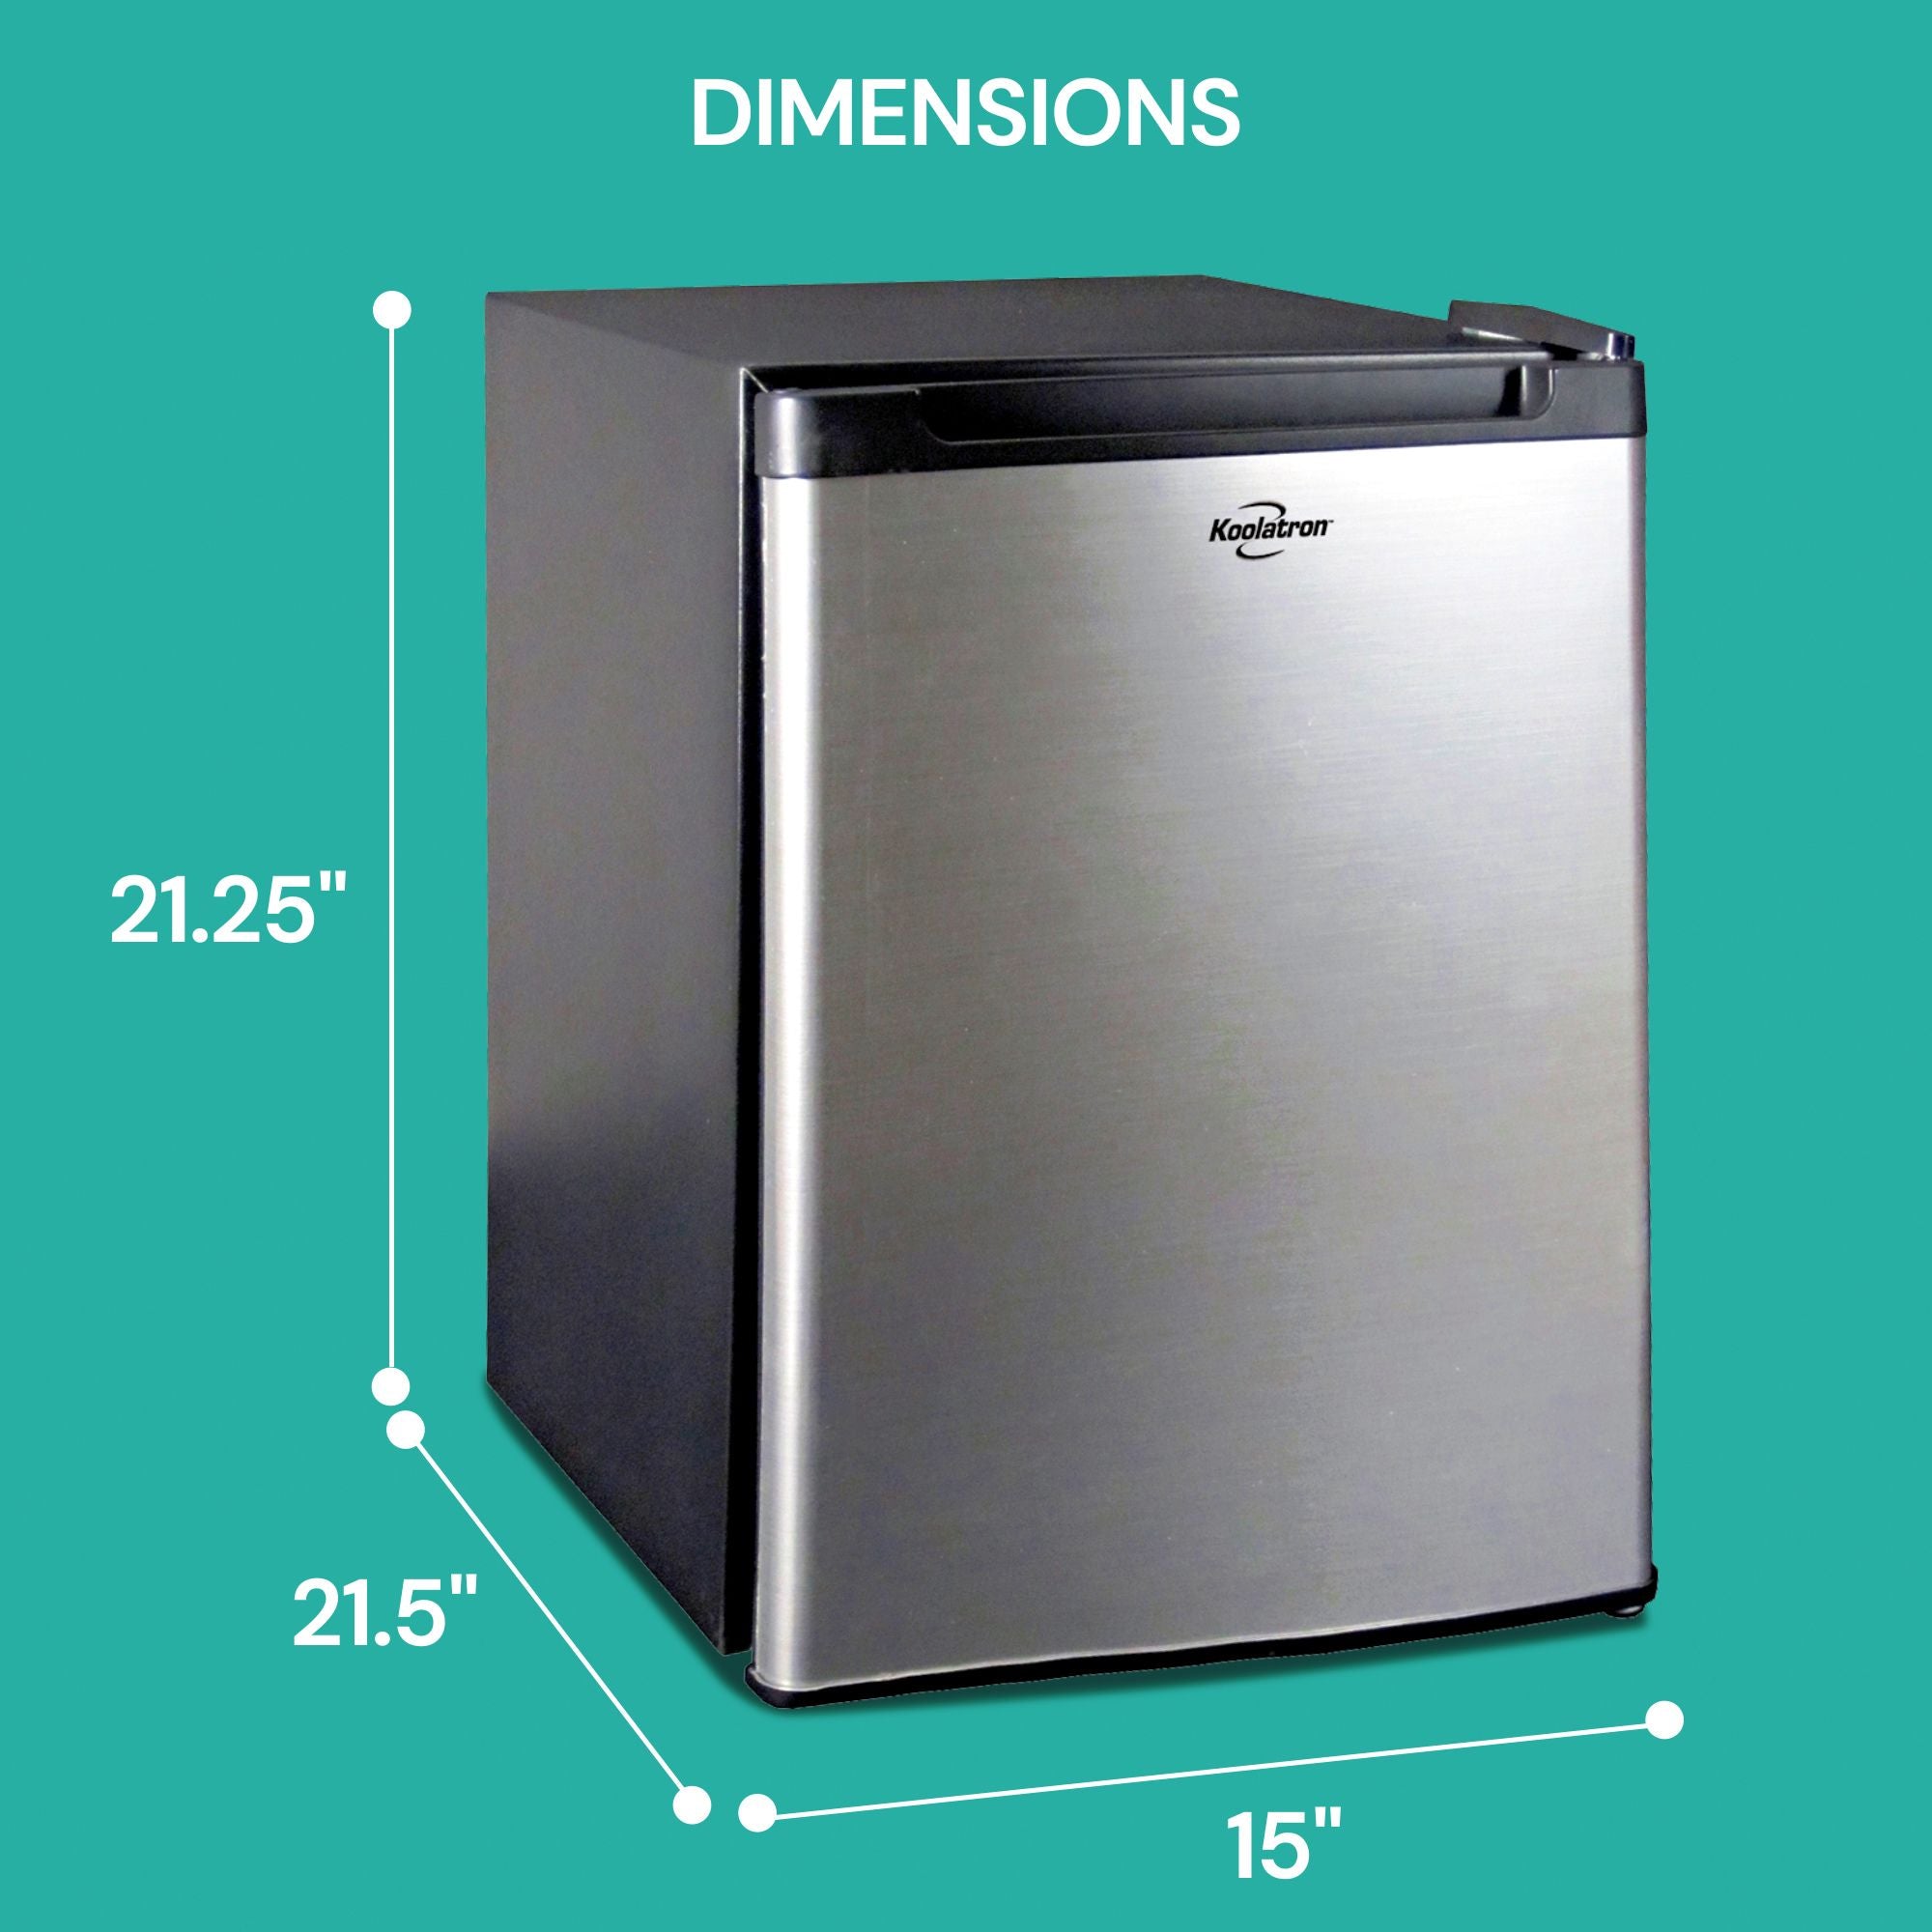 Black and stainless steel compact fridge on an aqua background with dimensions labeled